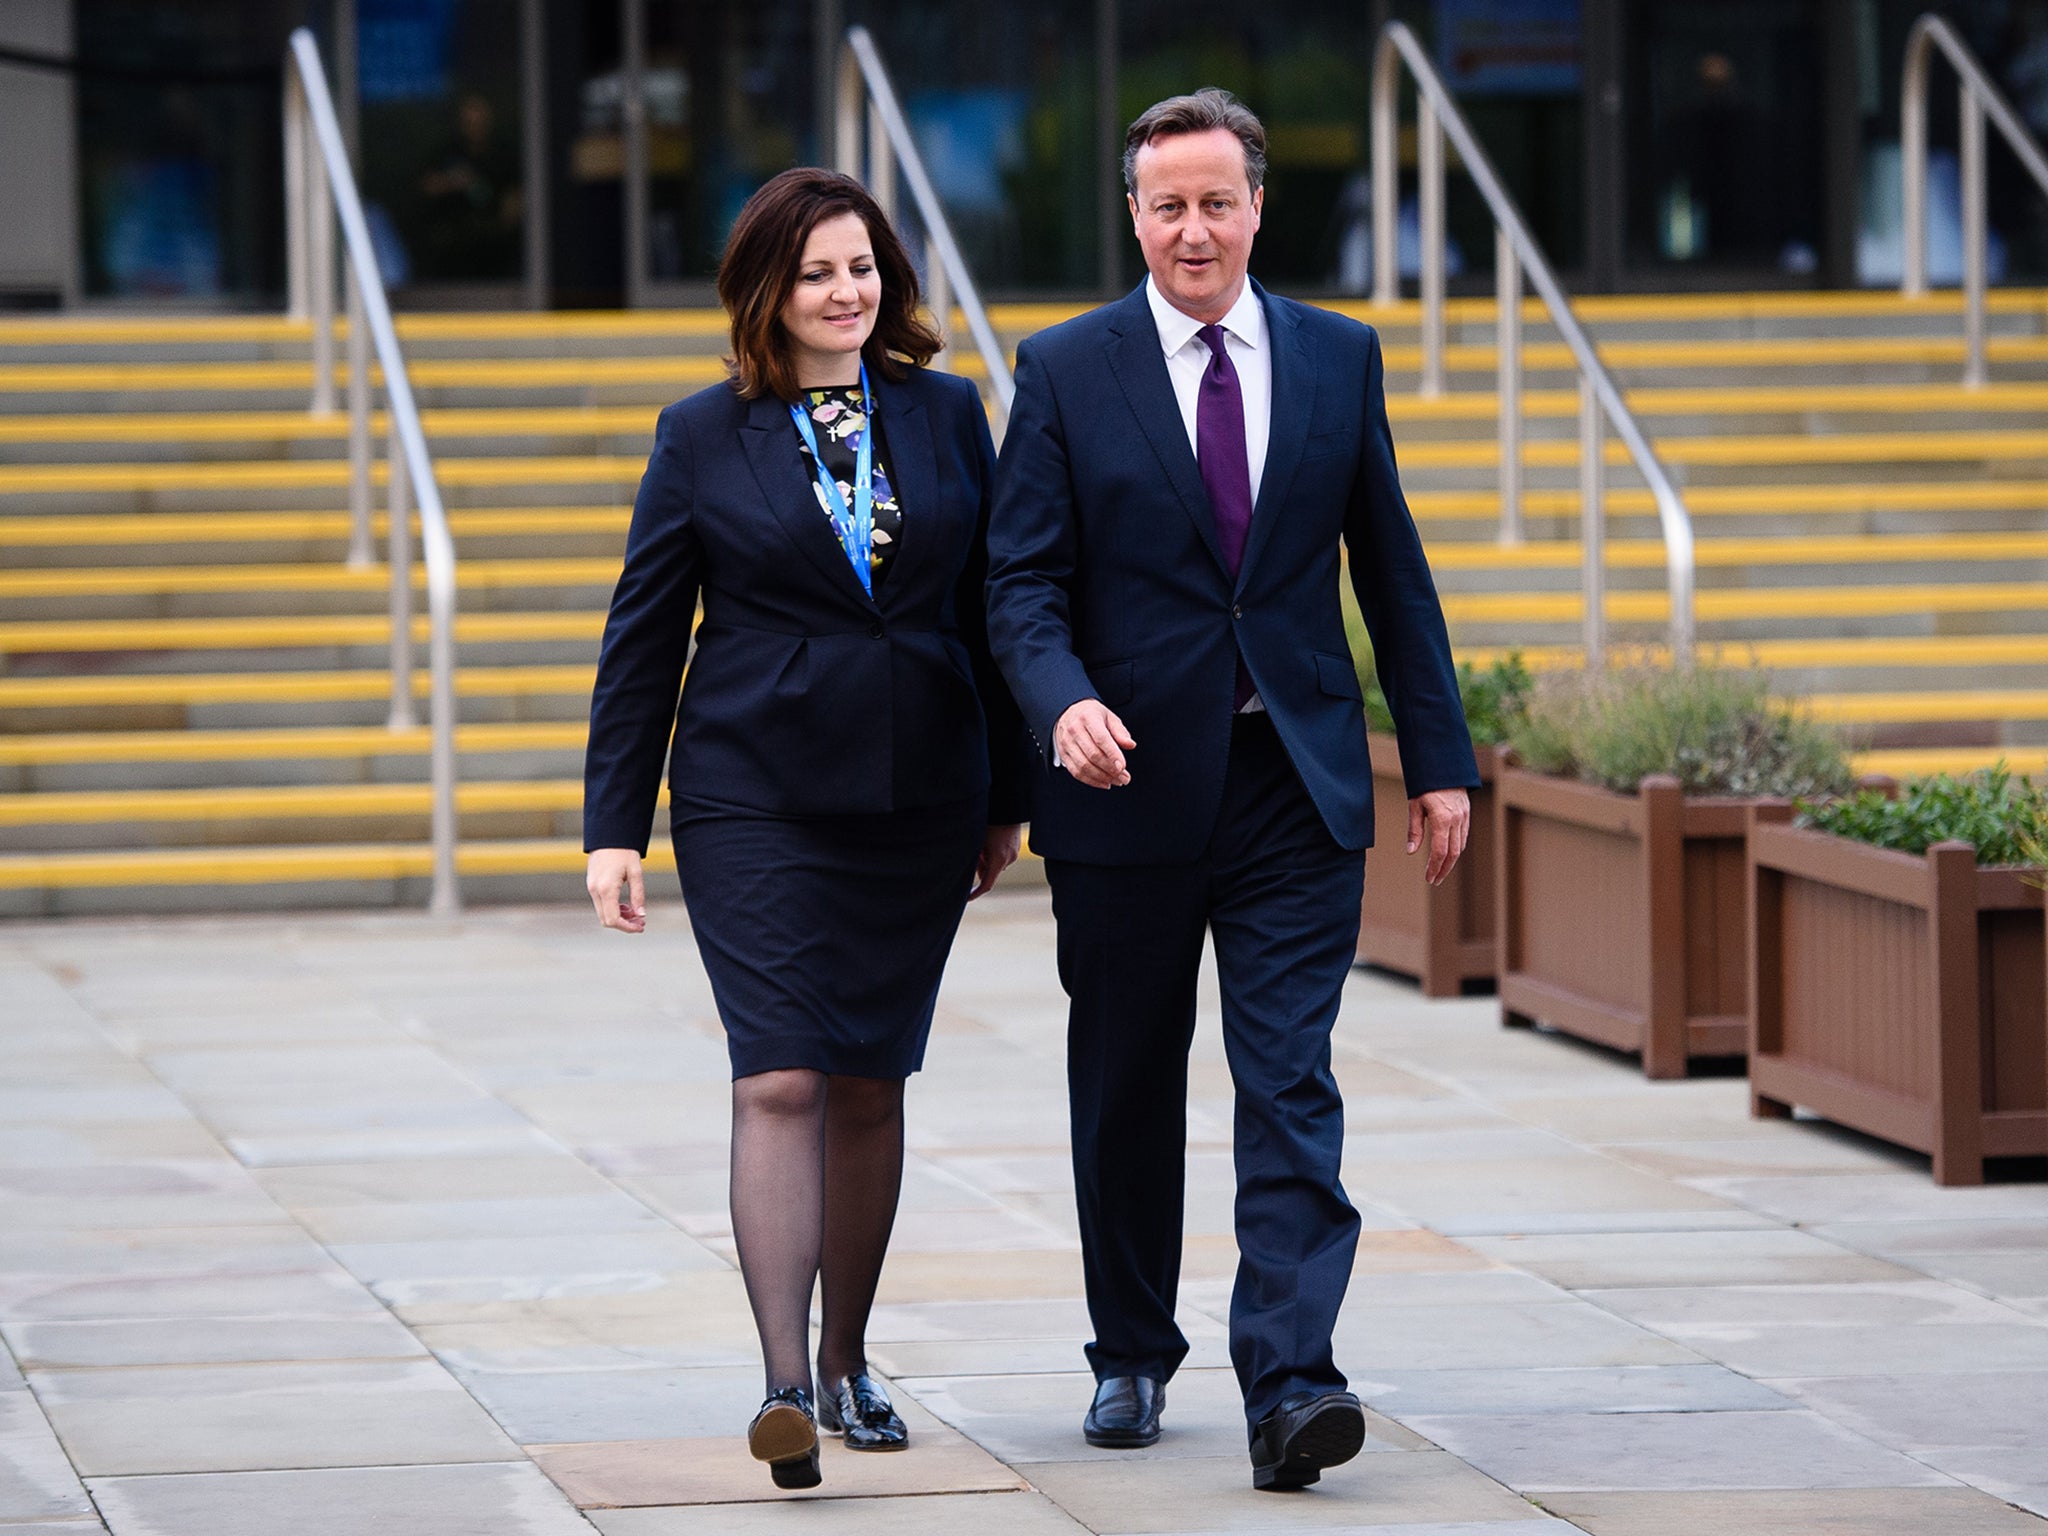 David Cameron walks from the main hall with Caroline Ansell, MP for Eastbourne and Willingdon, on the third day of the annual Conservative Party Conference in Manchester